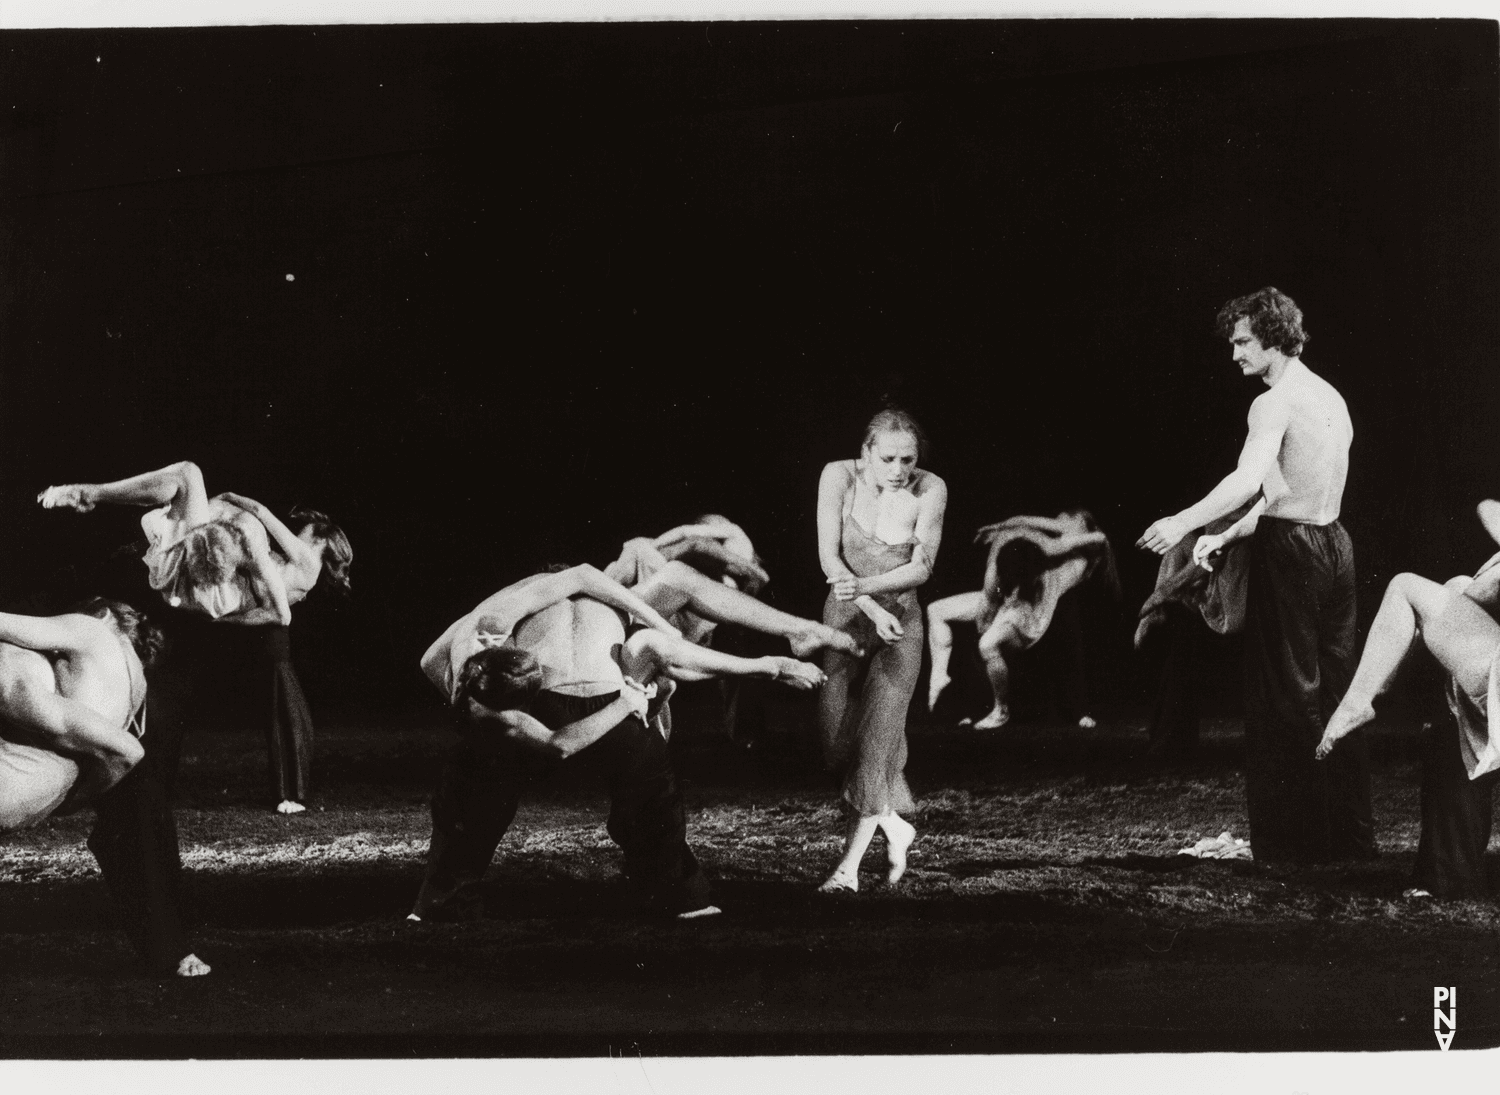 Jan Minařík and Marlis Alt in “The Rite of Spring” by Pina Bausch